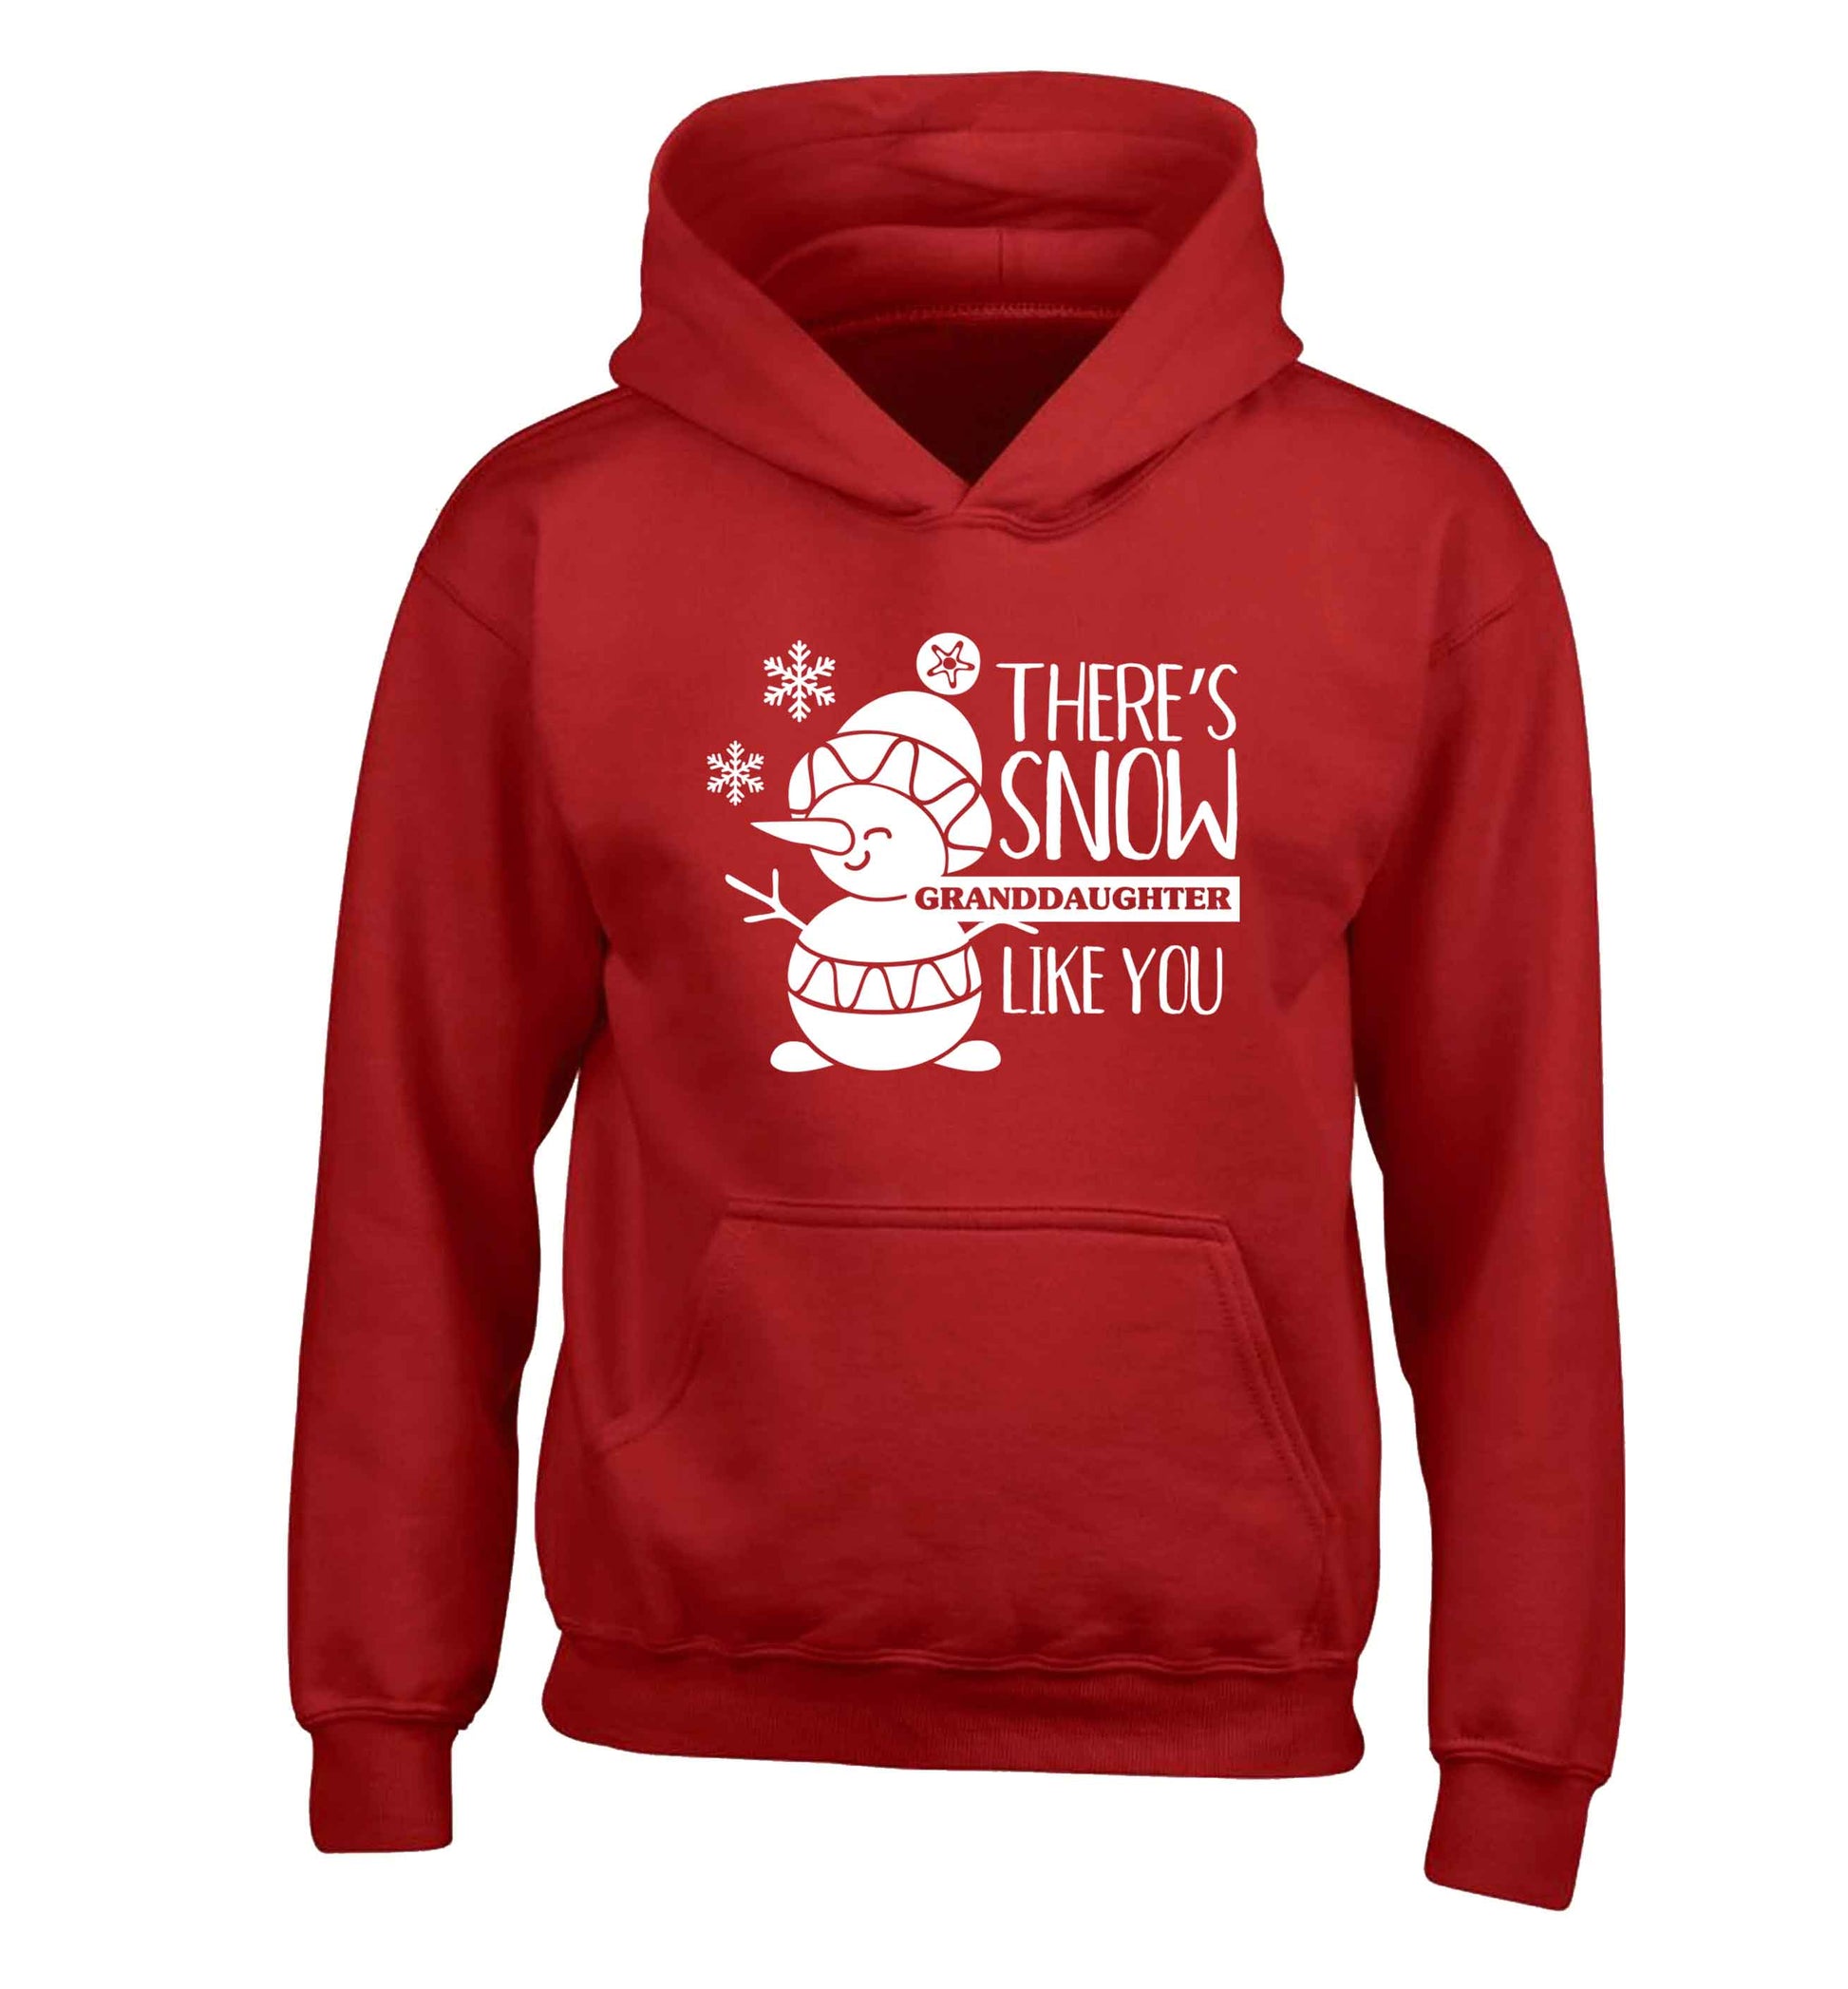 There's snow granddaughter like you children's red hoodie 12-13 Years